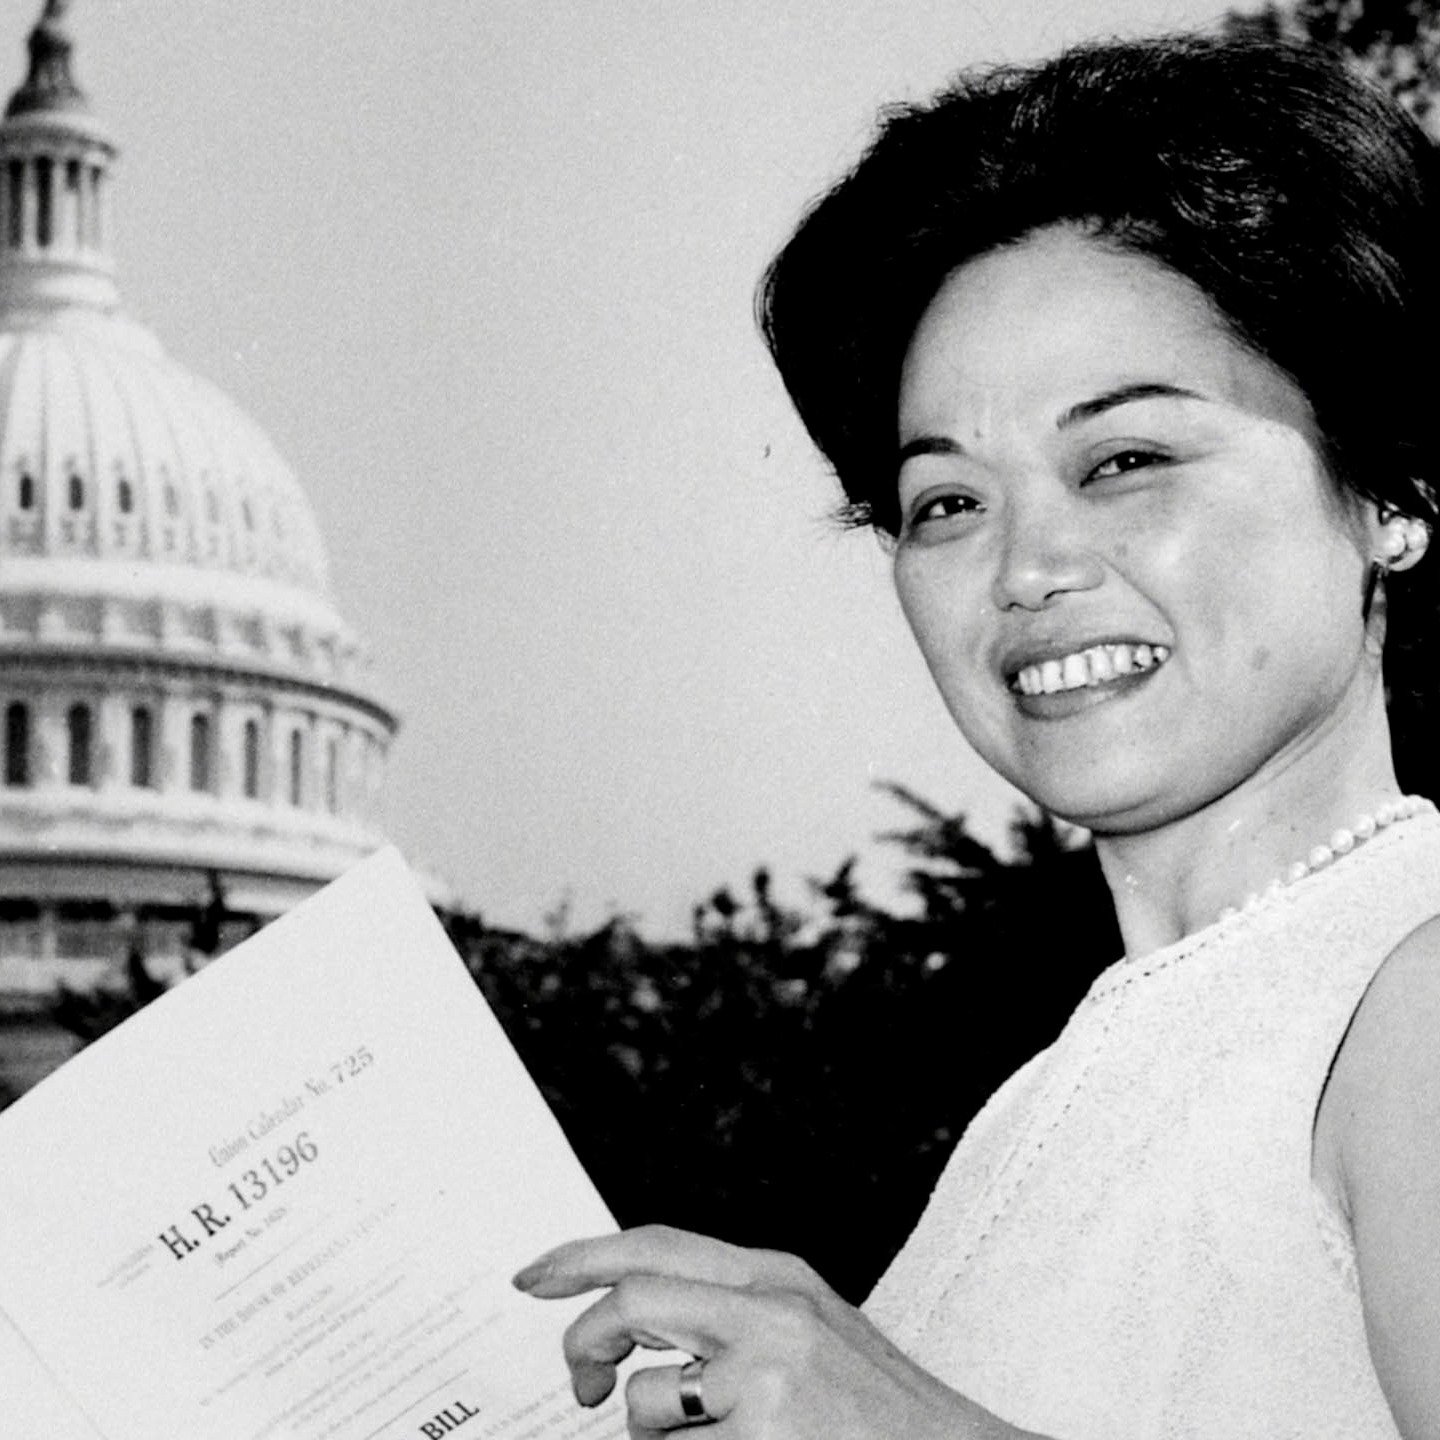 More 6pm film show previews

Told by her daughter Wendy, Mink! is the story of the remarkable Patsy Takemoto Mink, a Japanese American from Hawaii who became the first woman of color elected to the U.S. Congress, on her harrowing mission to co-author